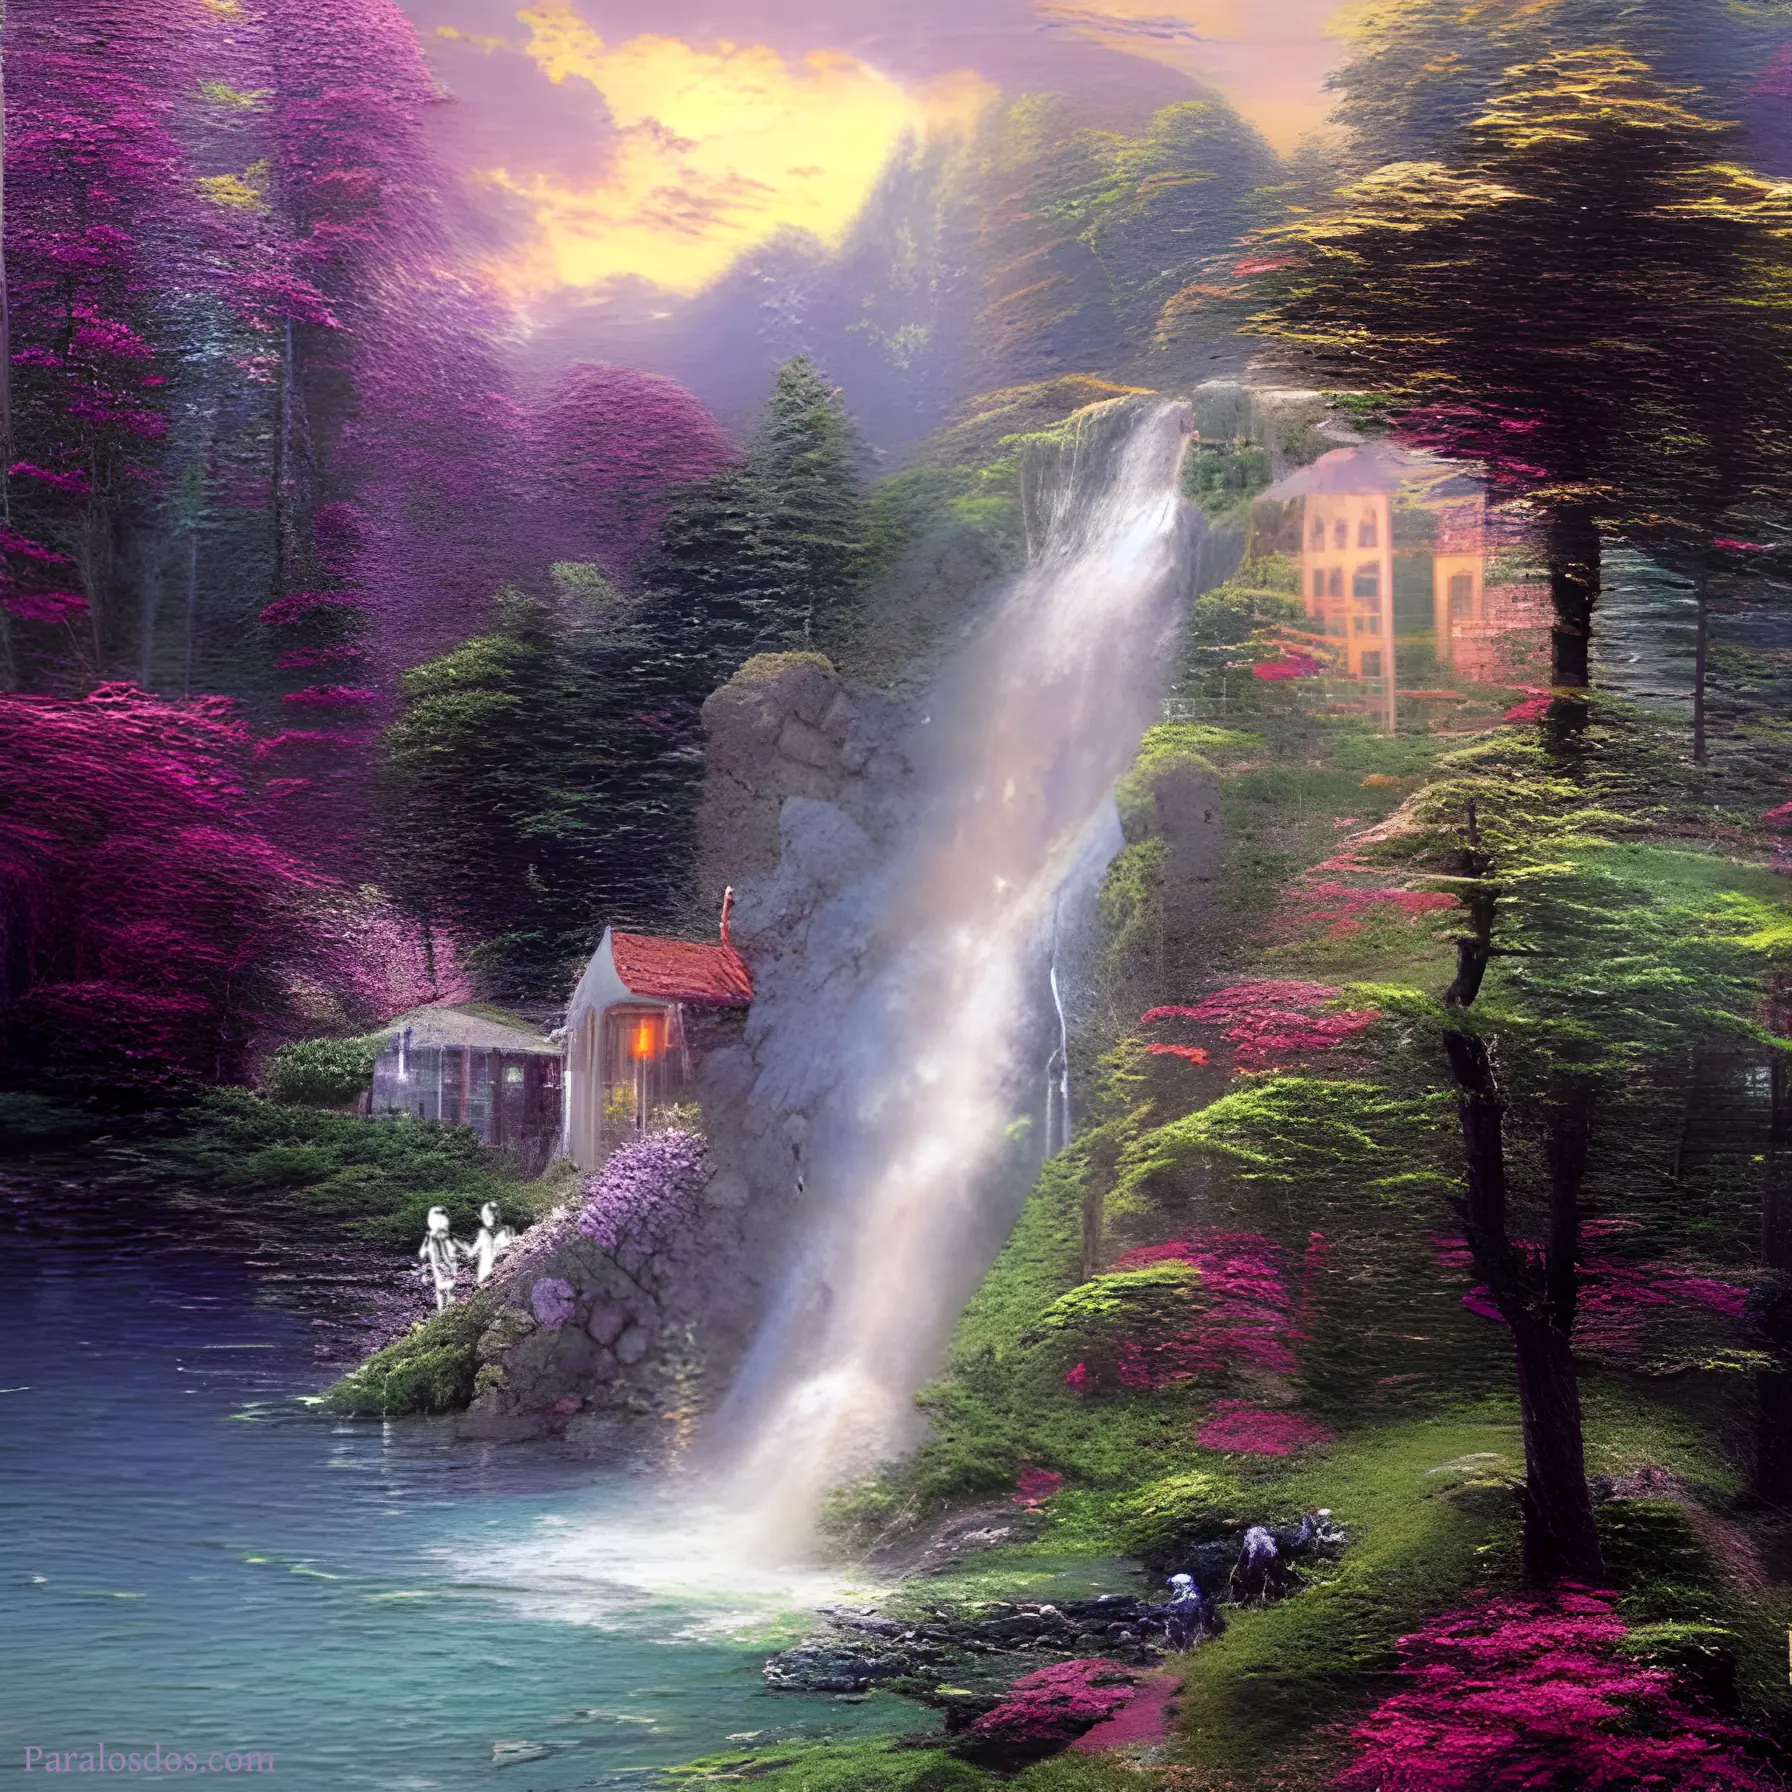 An artistic rendering of a colourful forest with homes nestled beside a waterfall.